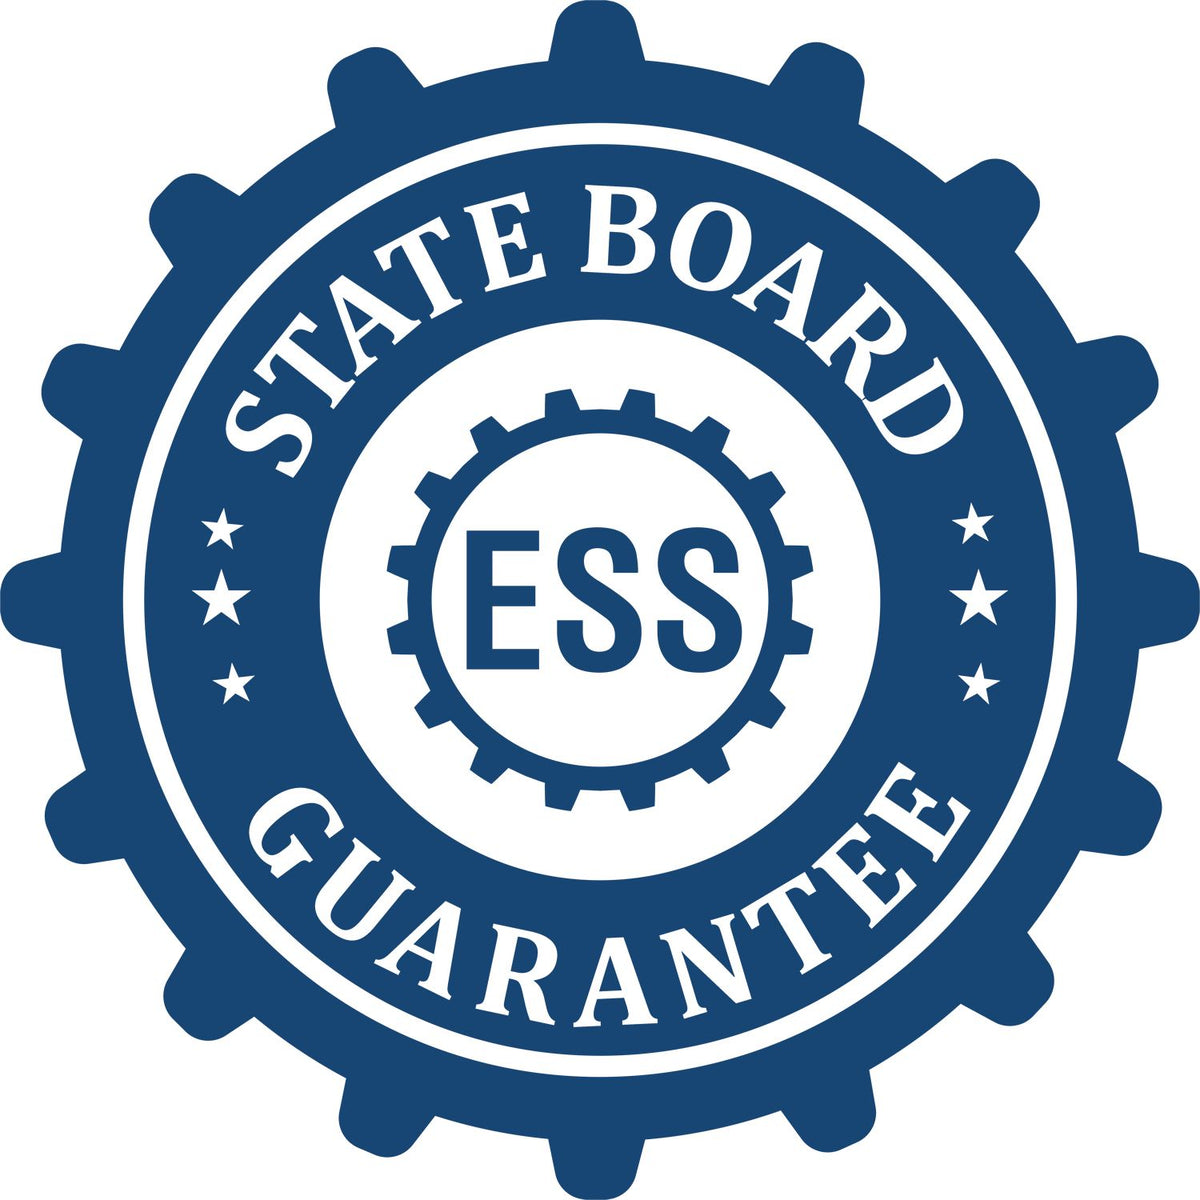 An emblem in a gear shape illustrating a state board guarantee for the Rhode Island Desk Architect Embossing Seal product.